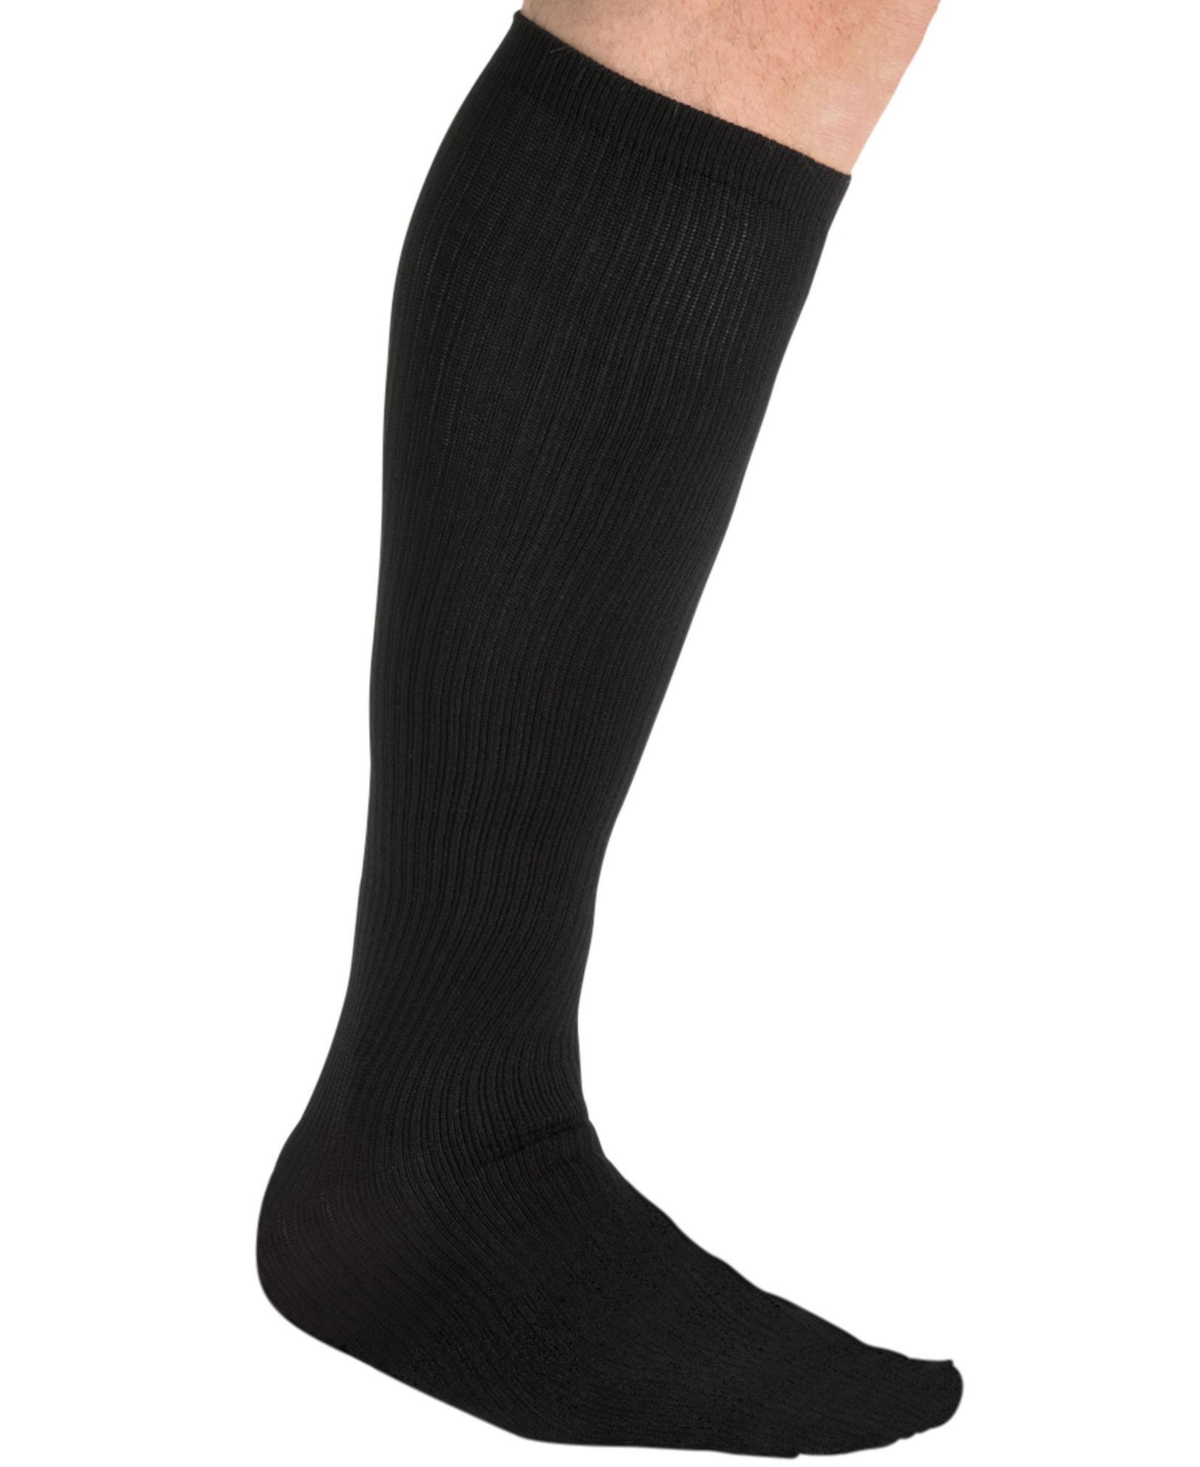 Big & Tall Over-The-Calf Compression Silver Socks - Charcoal